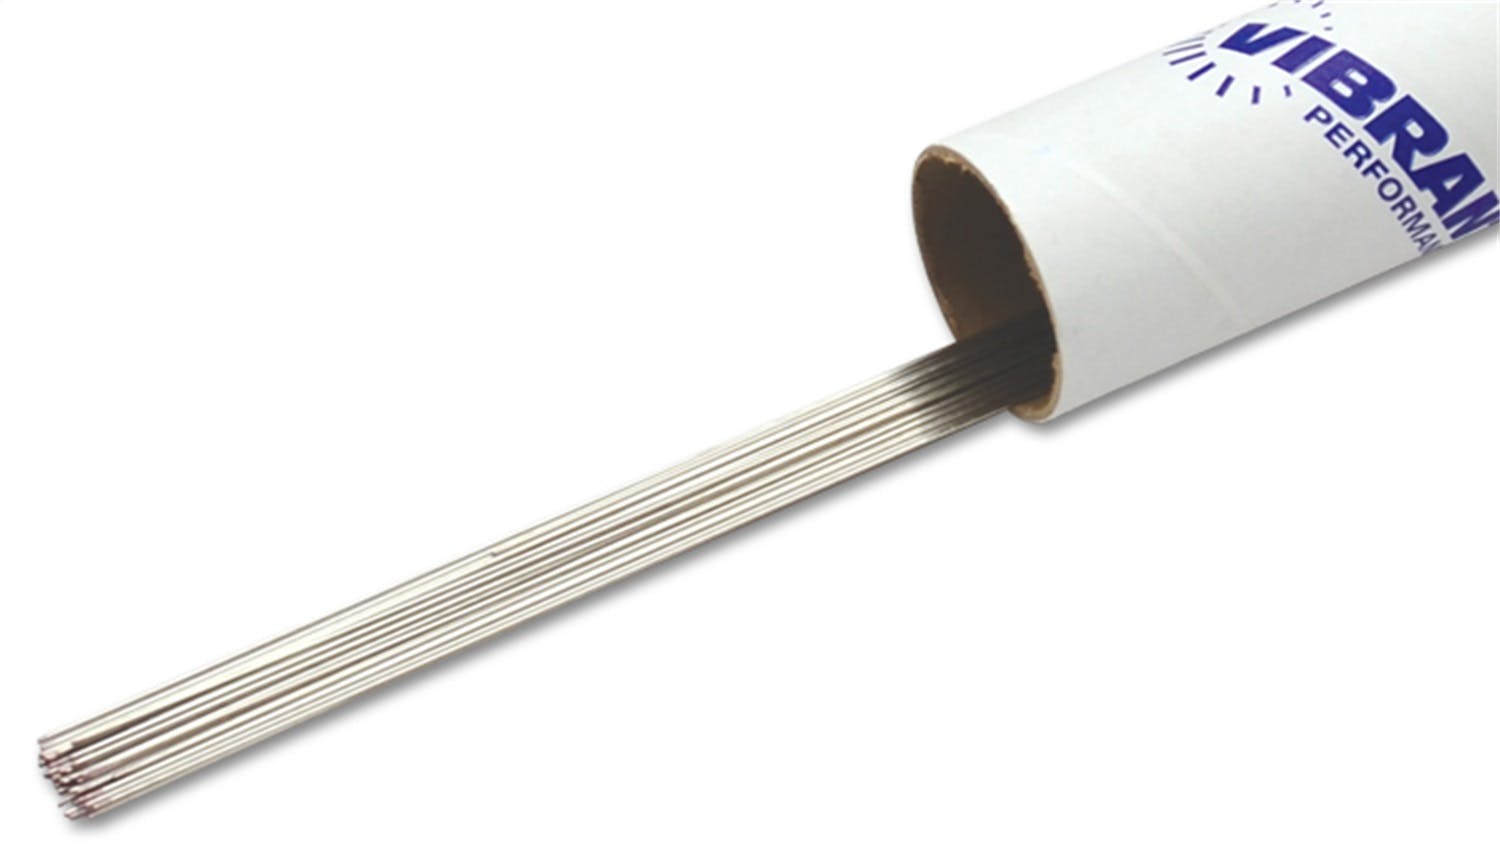 Vibrant Performance 29131 Wire Stainless ER308L - 0.035 inch Thick (0.9mm) - 39.5 inch Long Rod - 1lb box